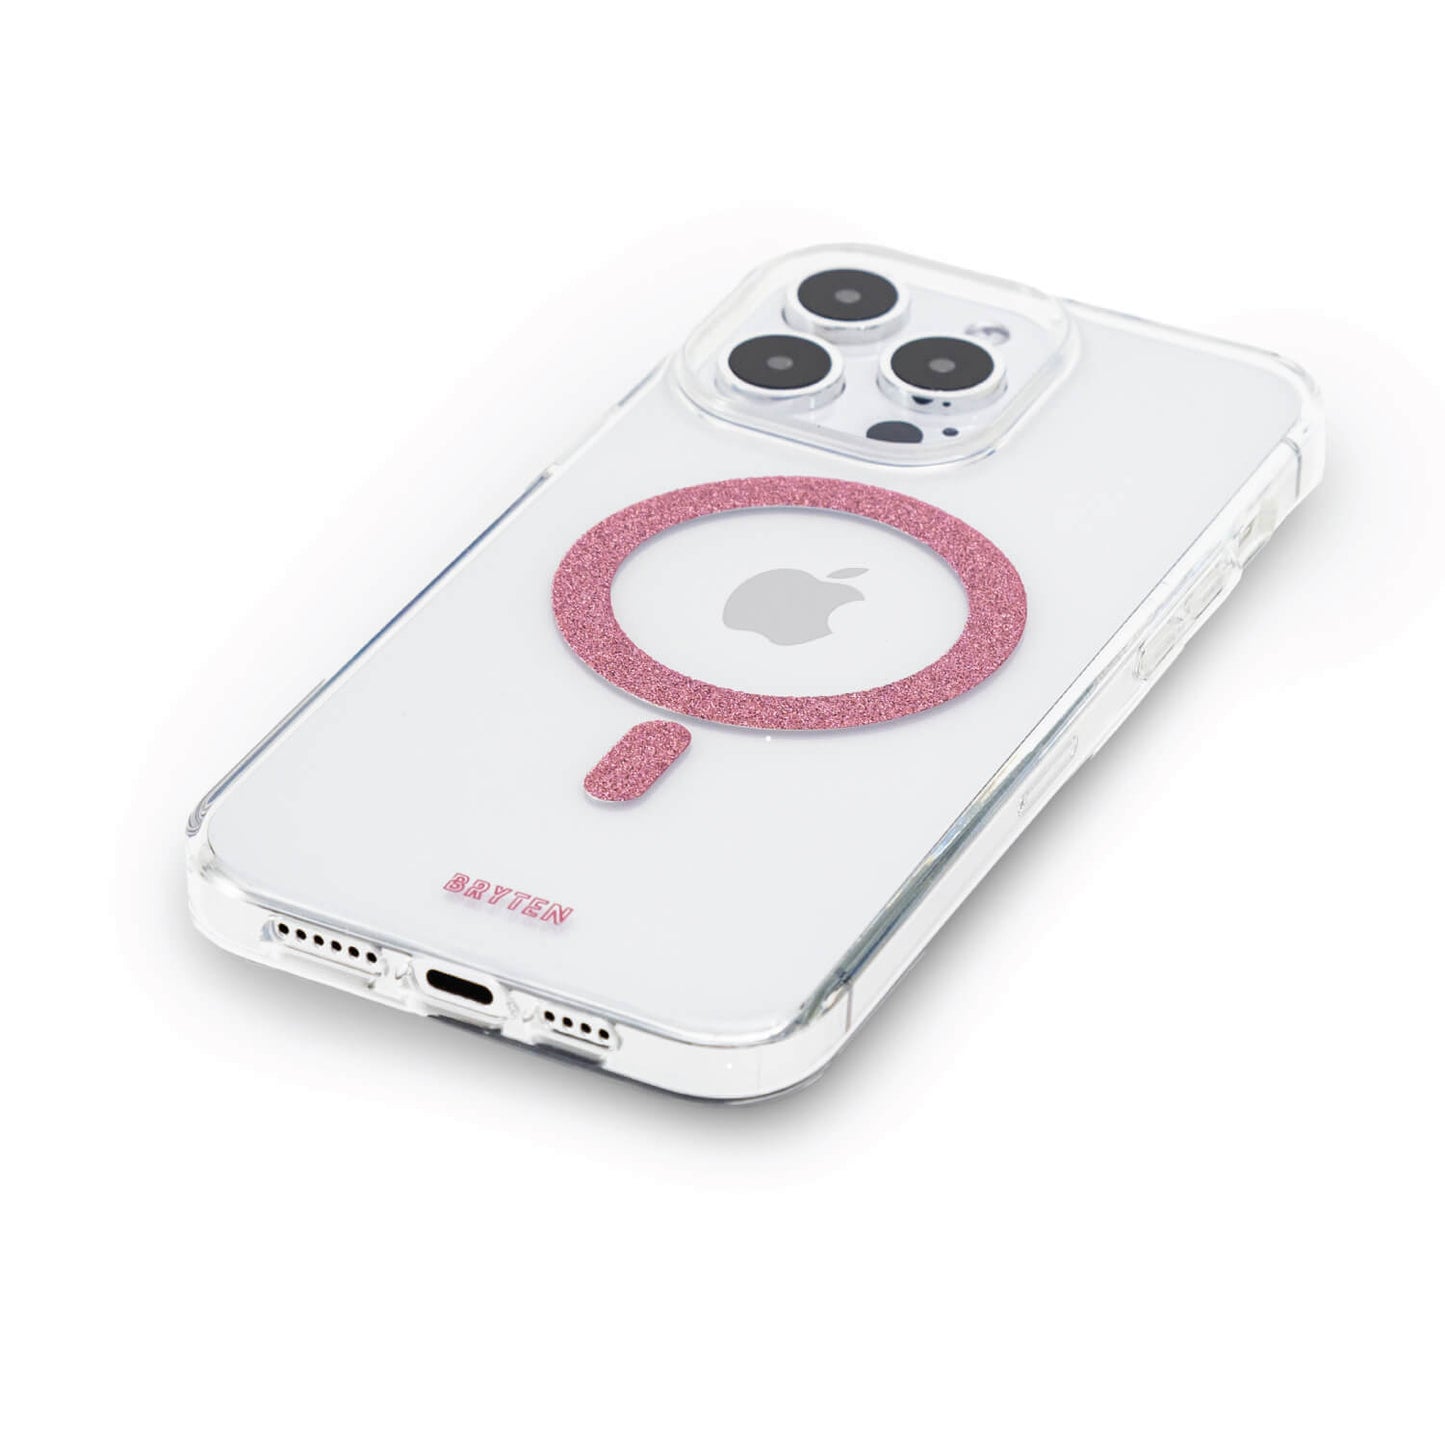 A clear Bryten MagFx iPhone 15 Pro Case with a pink circle on it, offering wireless charging capability.